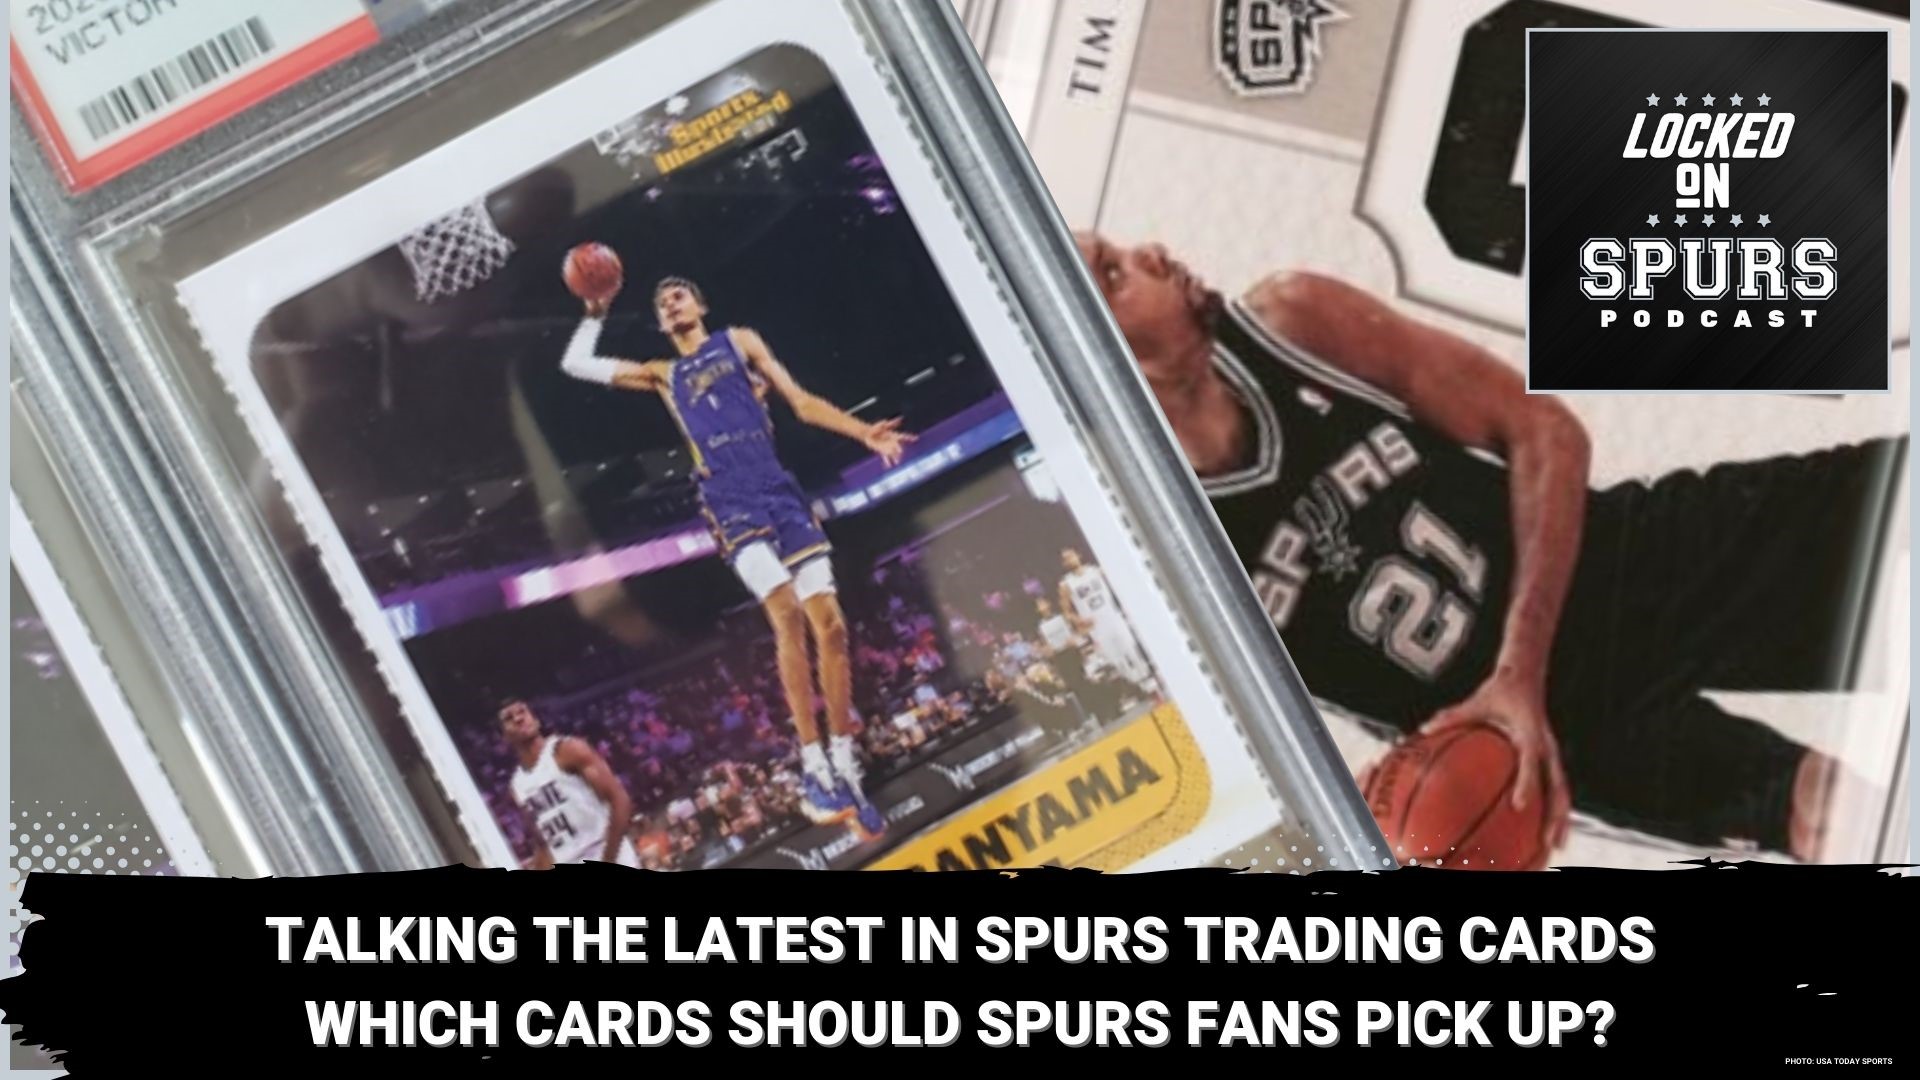 What is going on in the world of Spurs basketball trading cards?